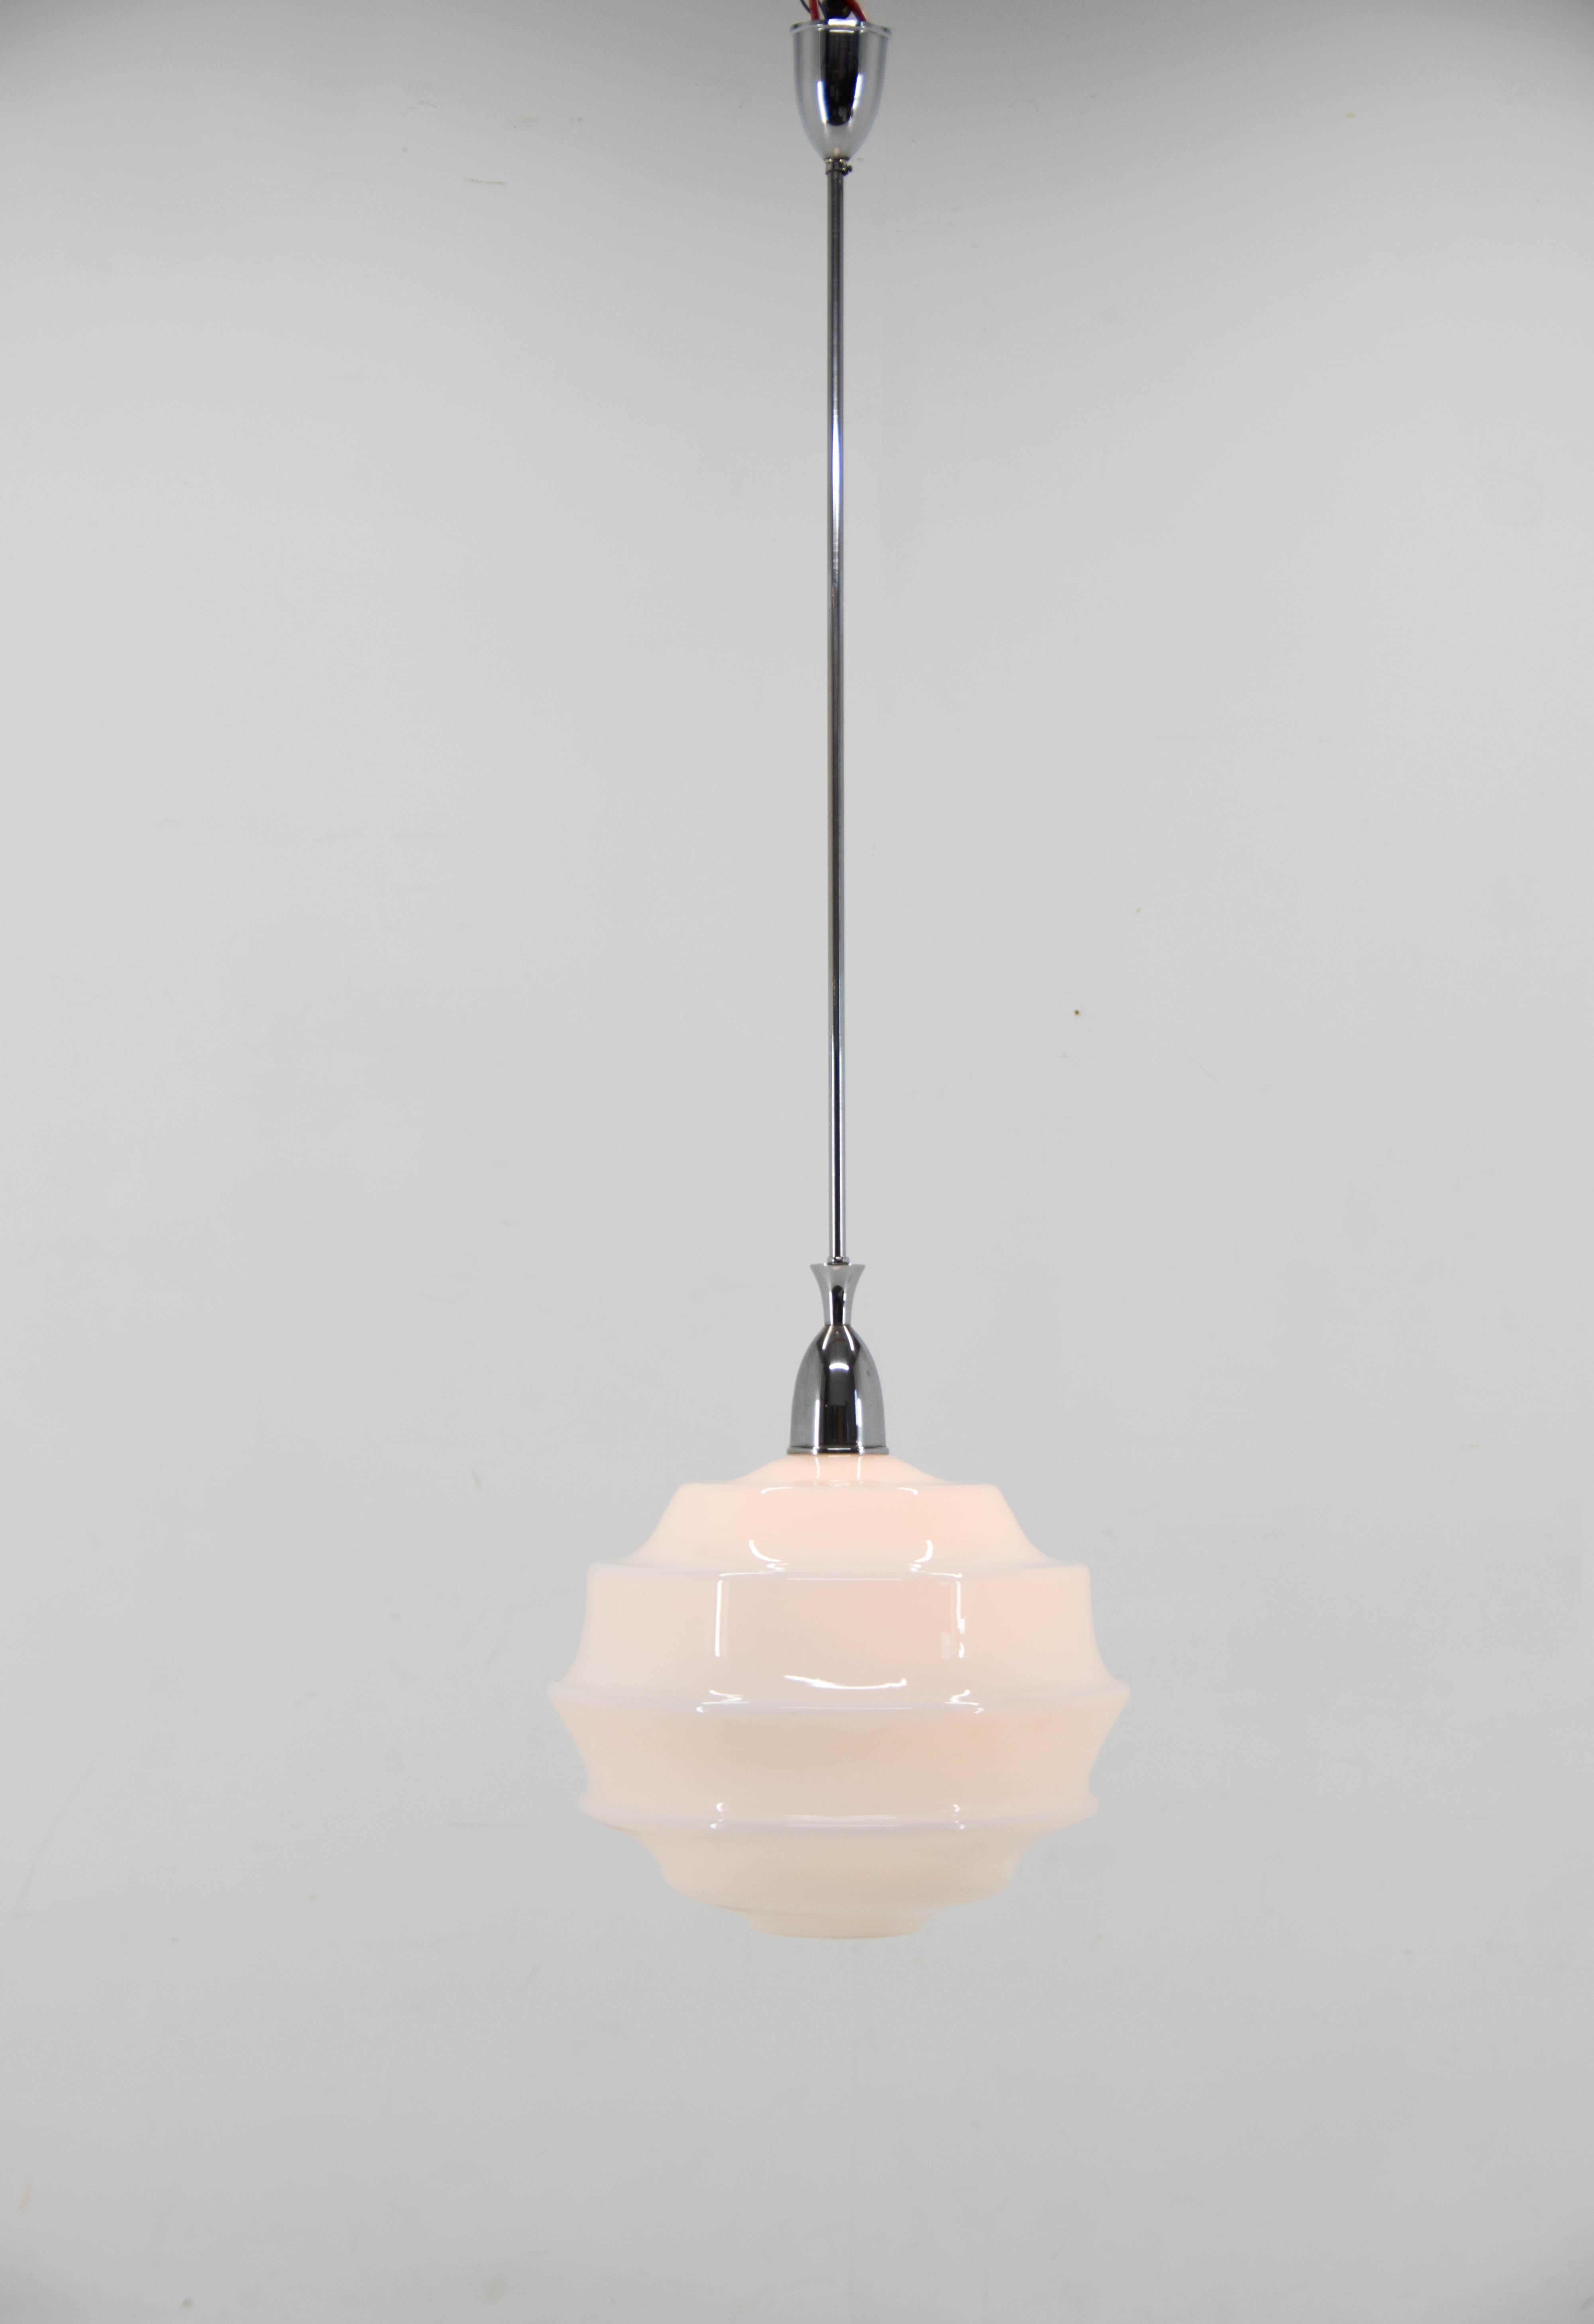 Huge pendant with glass shade in an unusual shape.
Chrome rod and canopy ceiling
Central rod can be shorten on request
Rewired
1x100W, E25-E27 bulb
US wiring compatible.